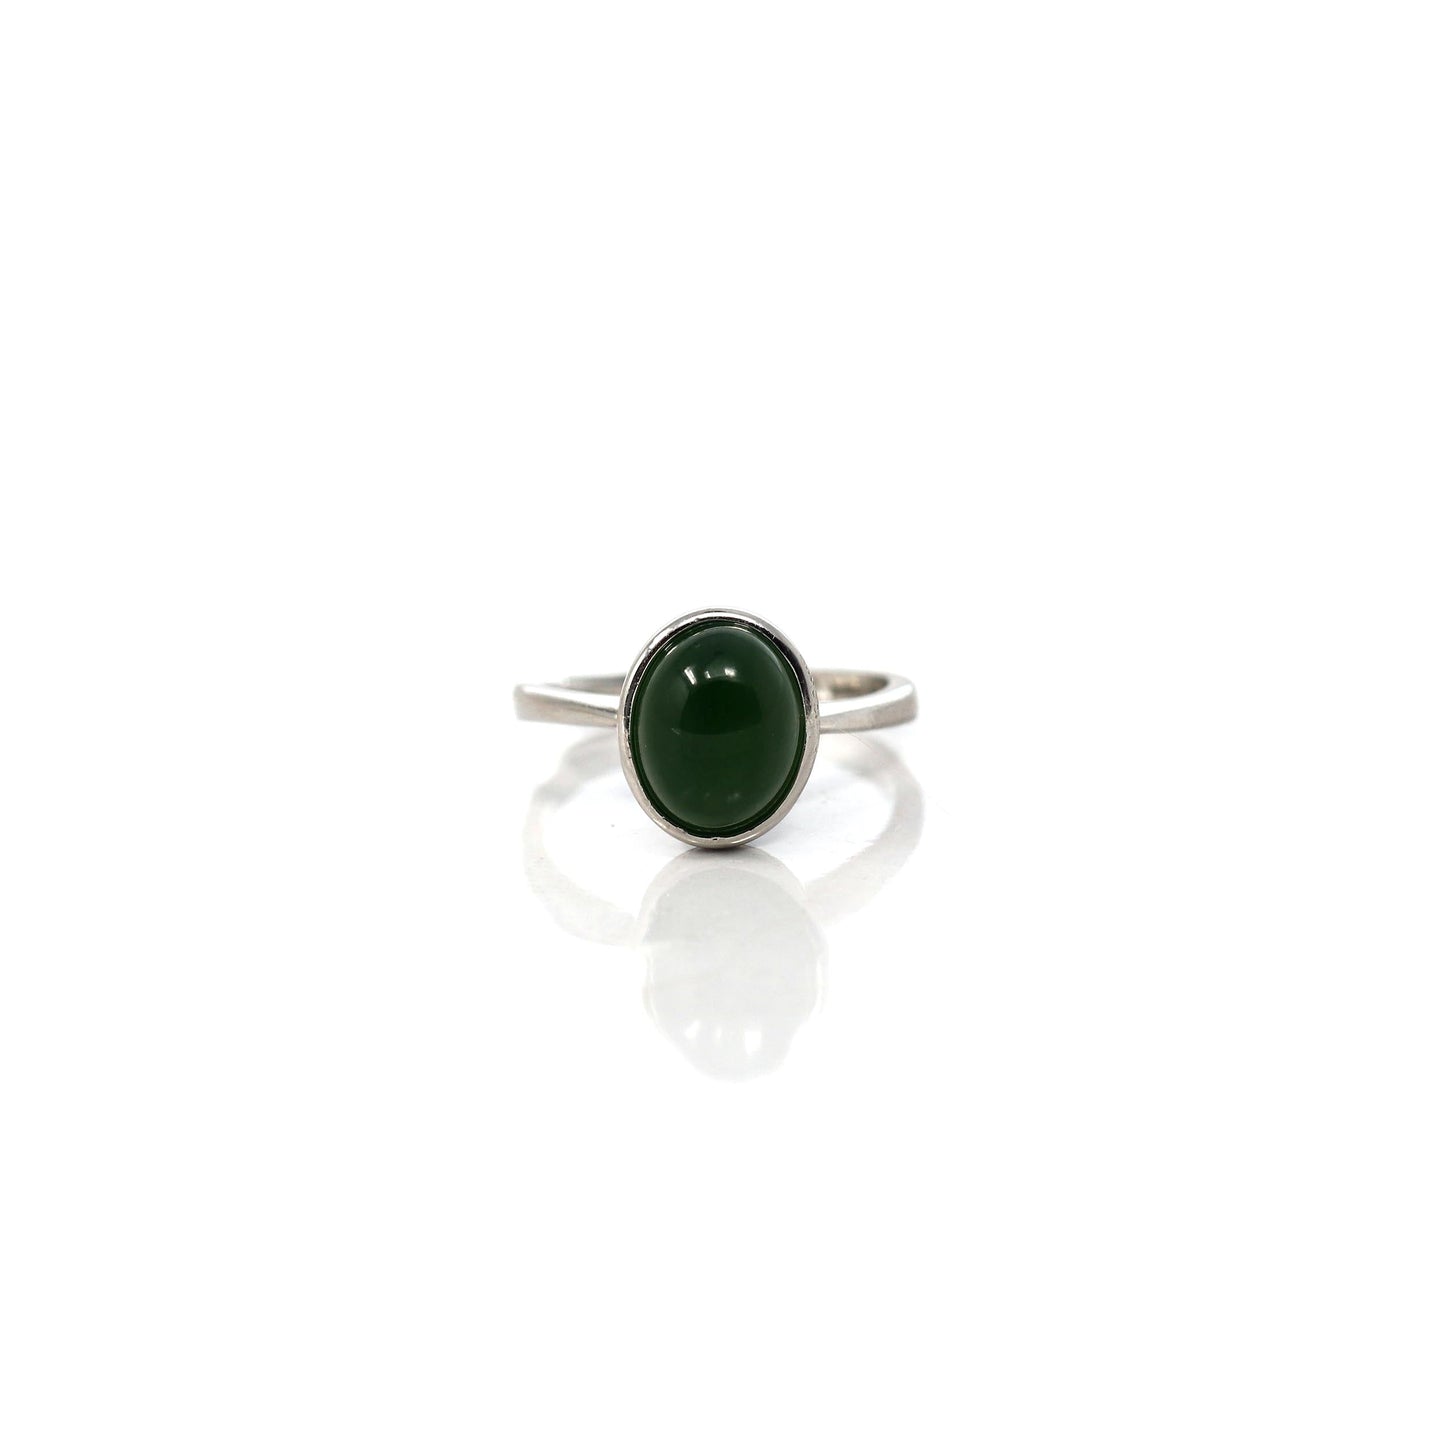 RealJade® Co. RealJade® Co. "Classic Oval" Sterling Silver Deep Green Nephrite Jade Classic Ring For Her